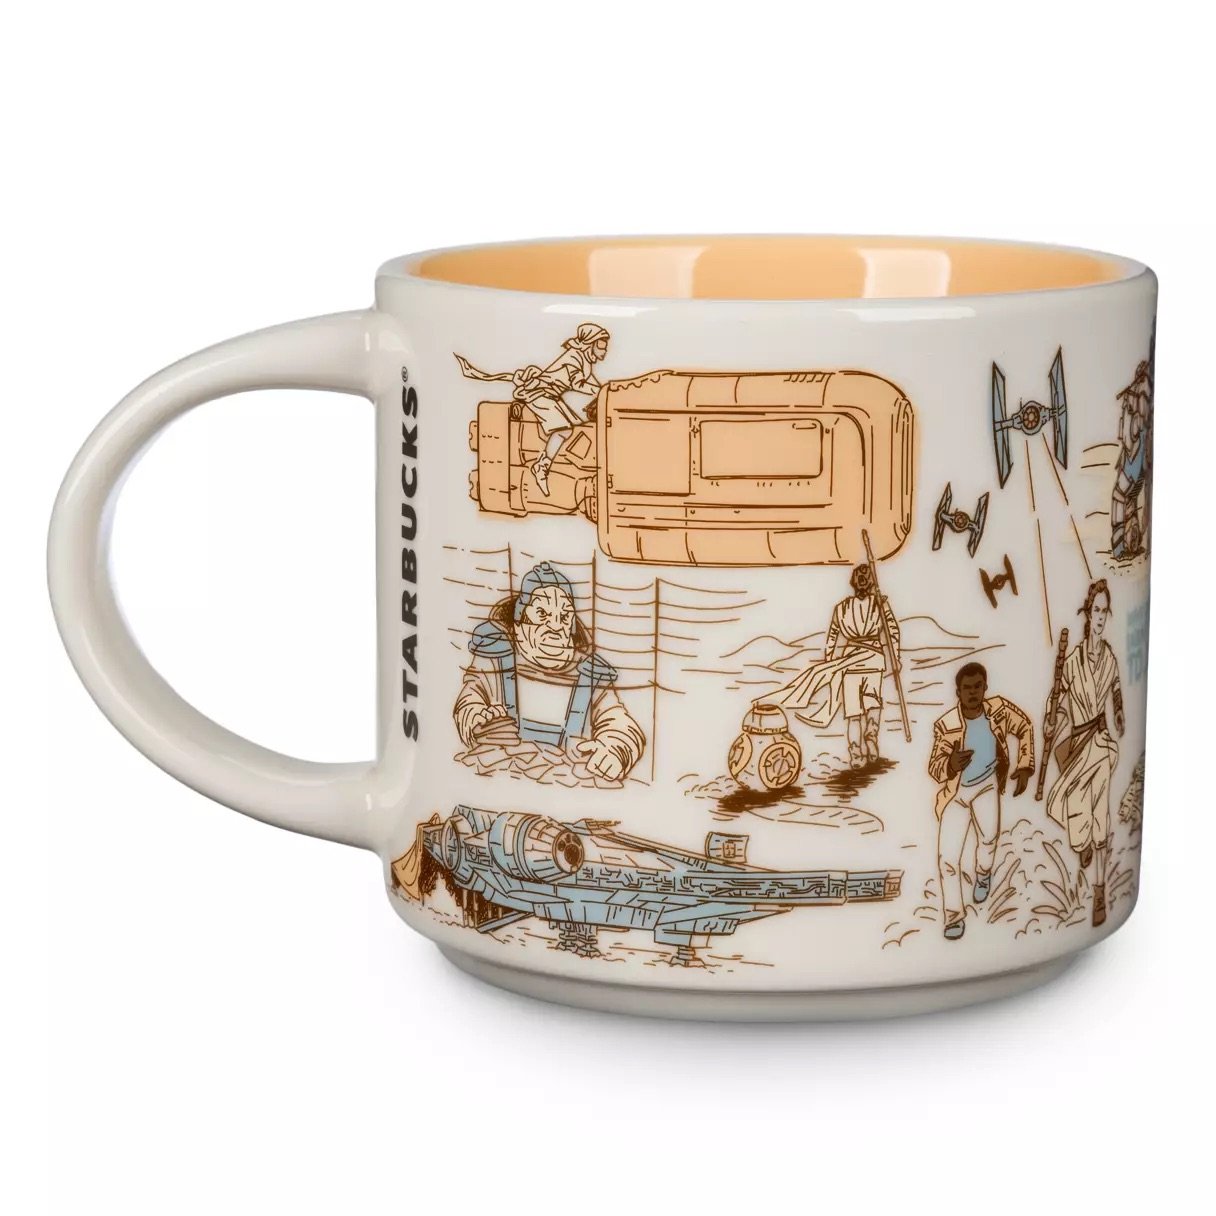 Product Review: 'BEEN THERE SERIES': Star Wars Mugs Collection - Fantha  Tracks